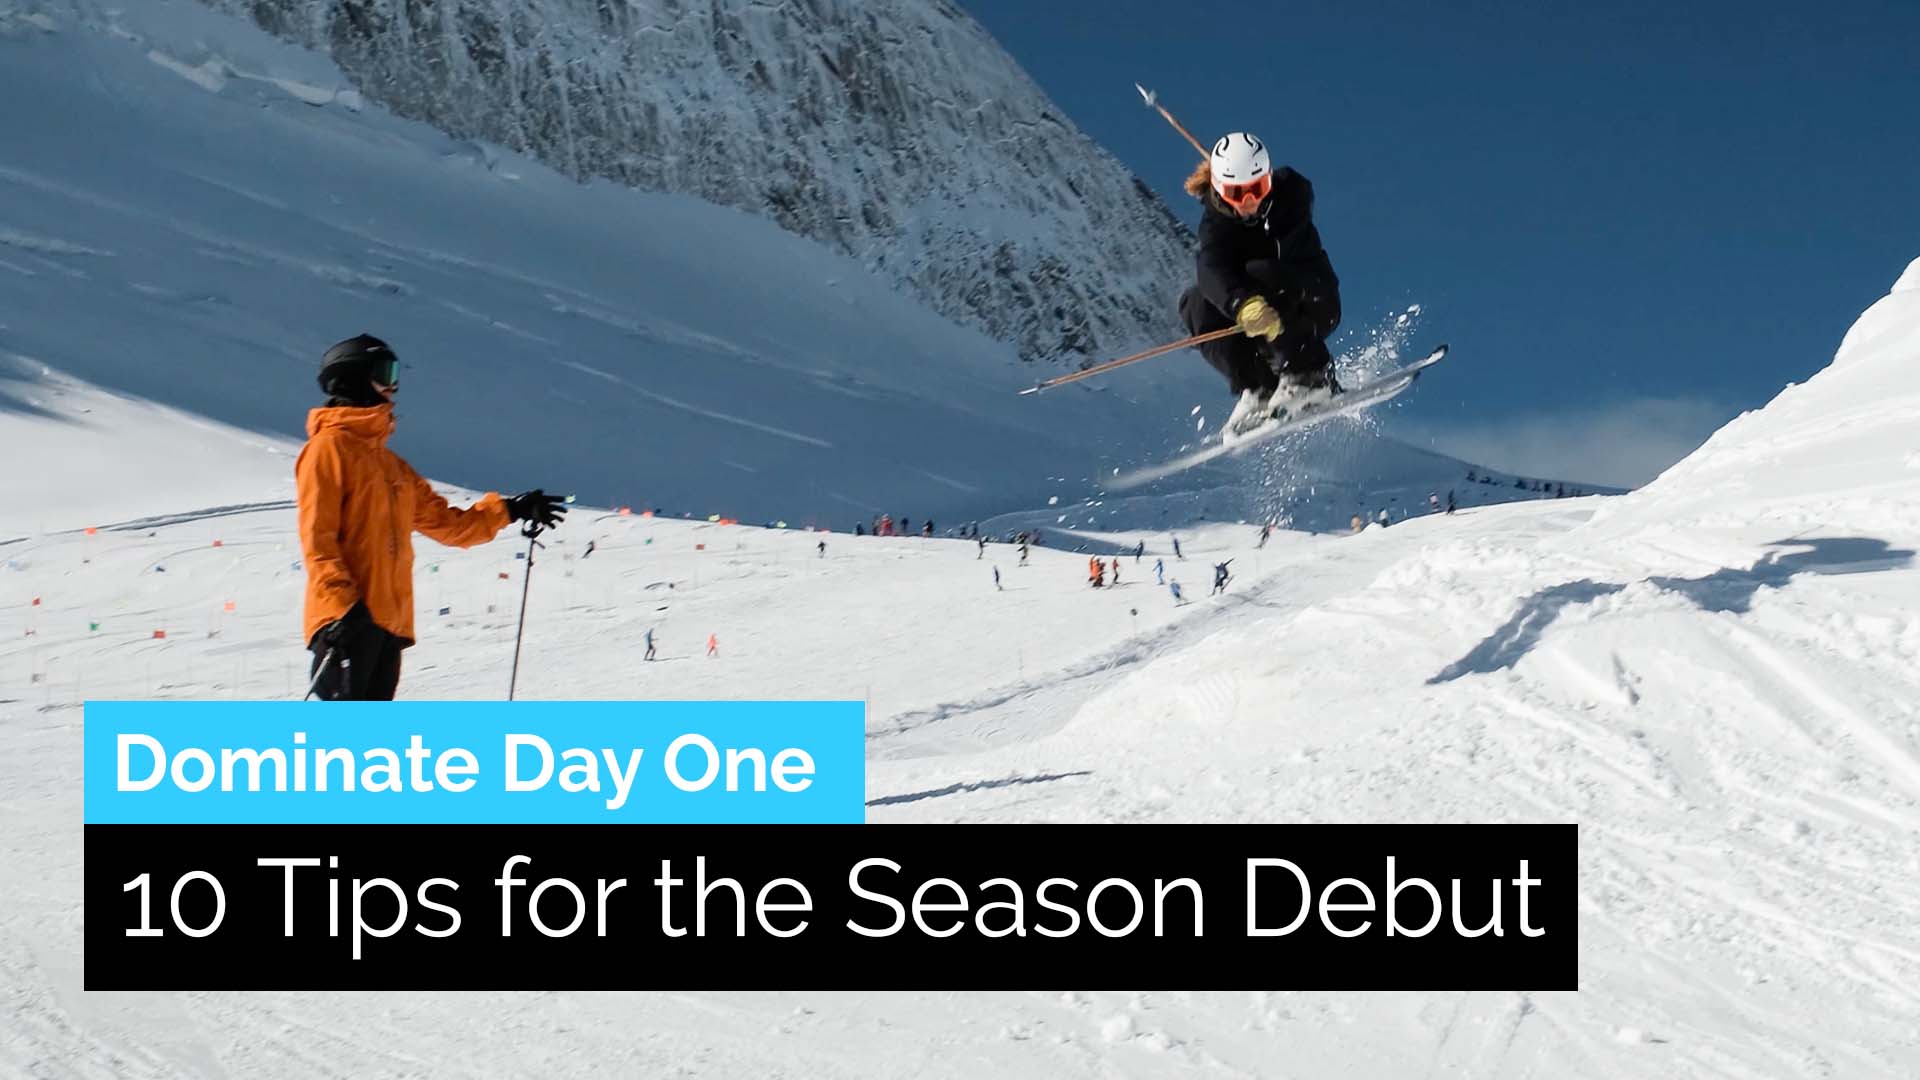 Dominate Day One: 10 Tips for Freestyle Skiing Season Debut